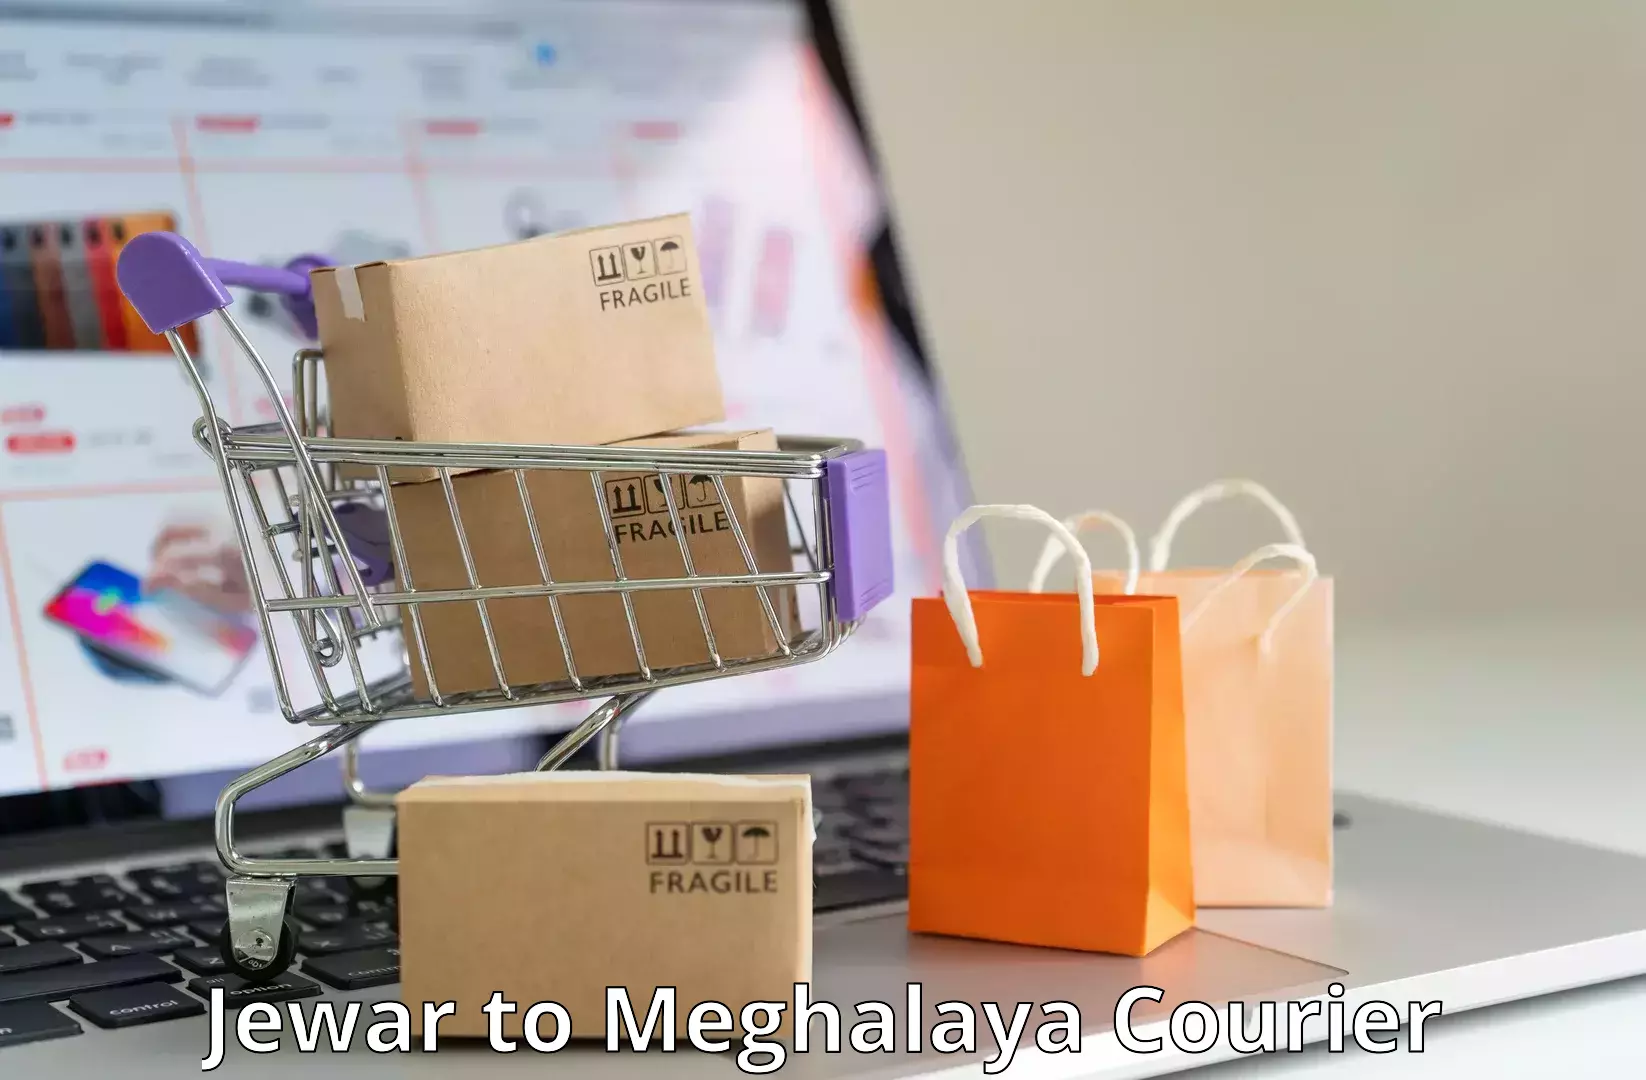 Professional parcel services in Jewar to Meghalaya